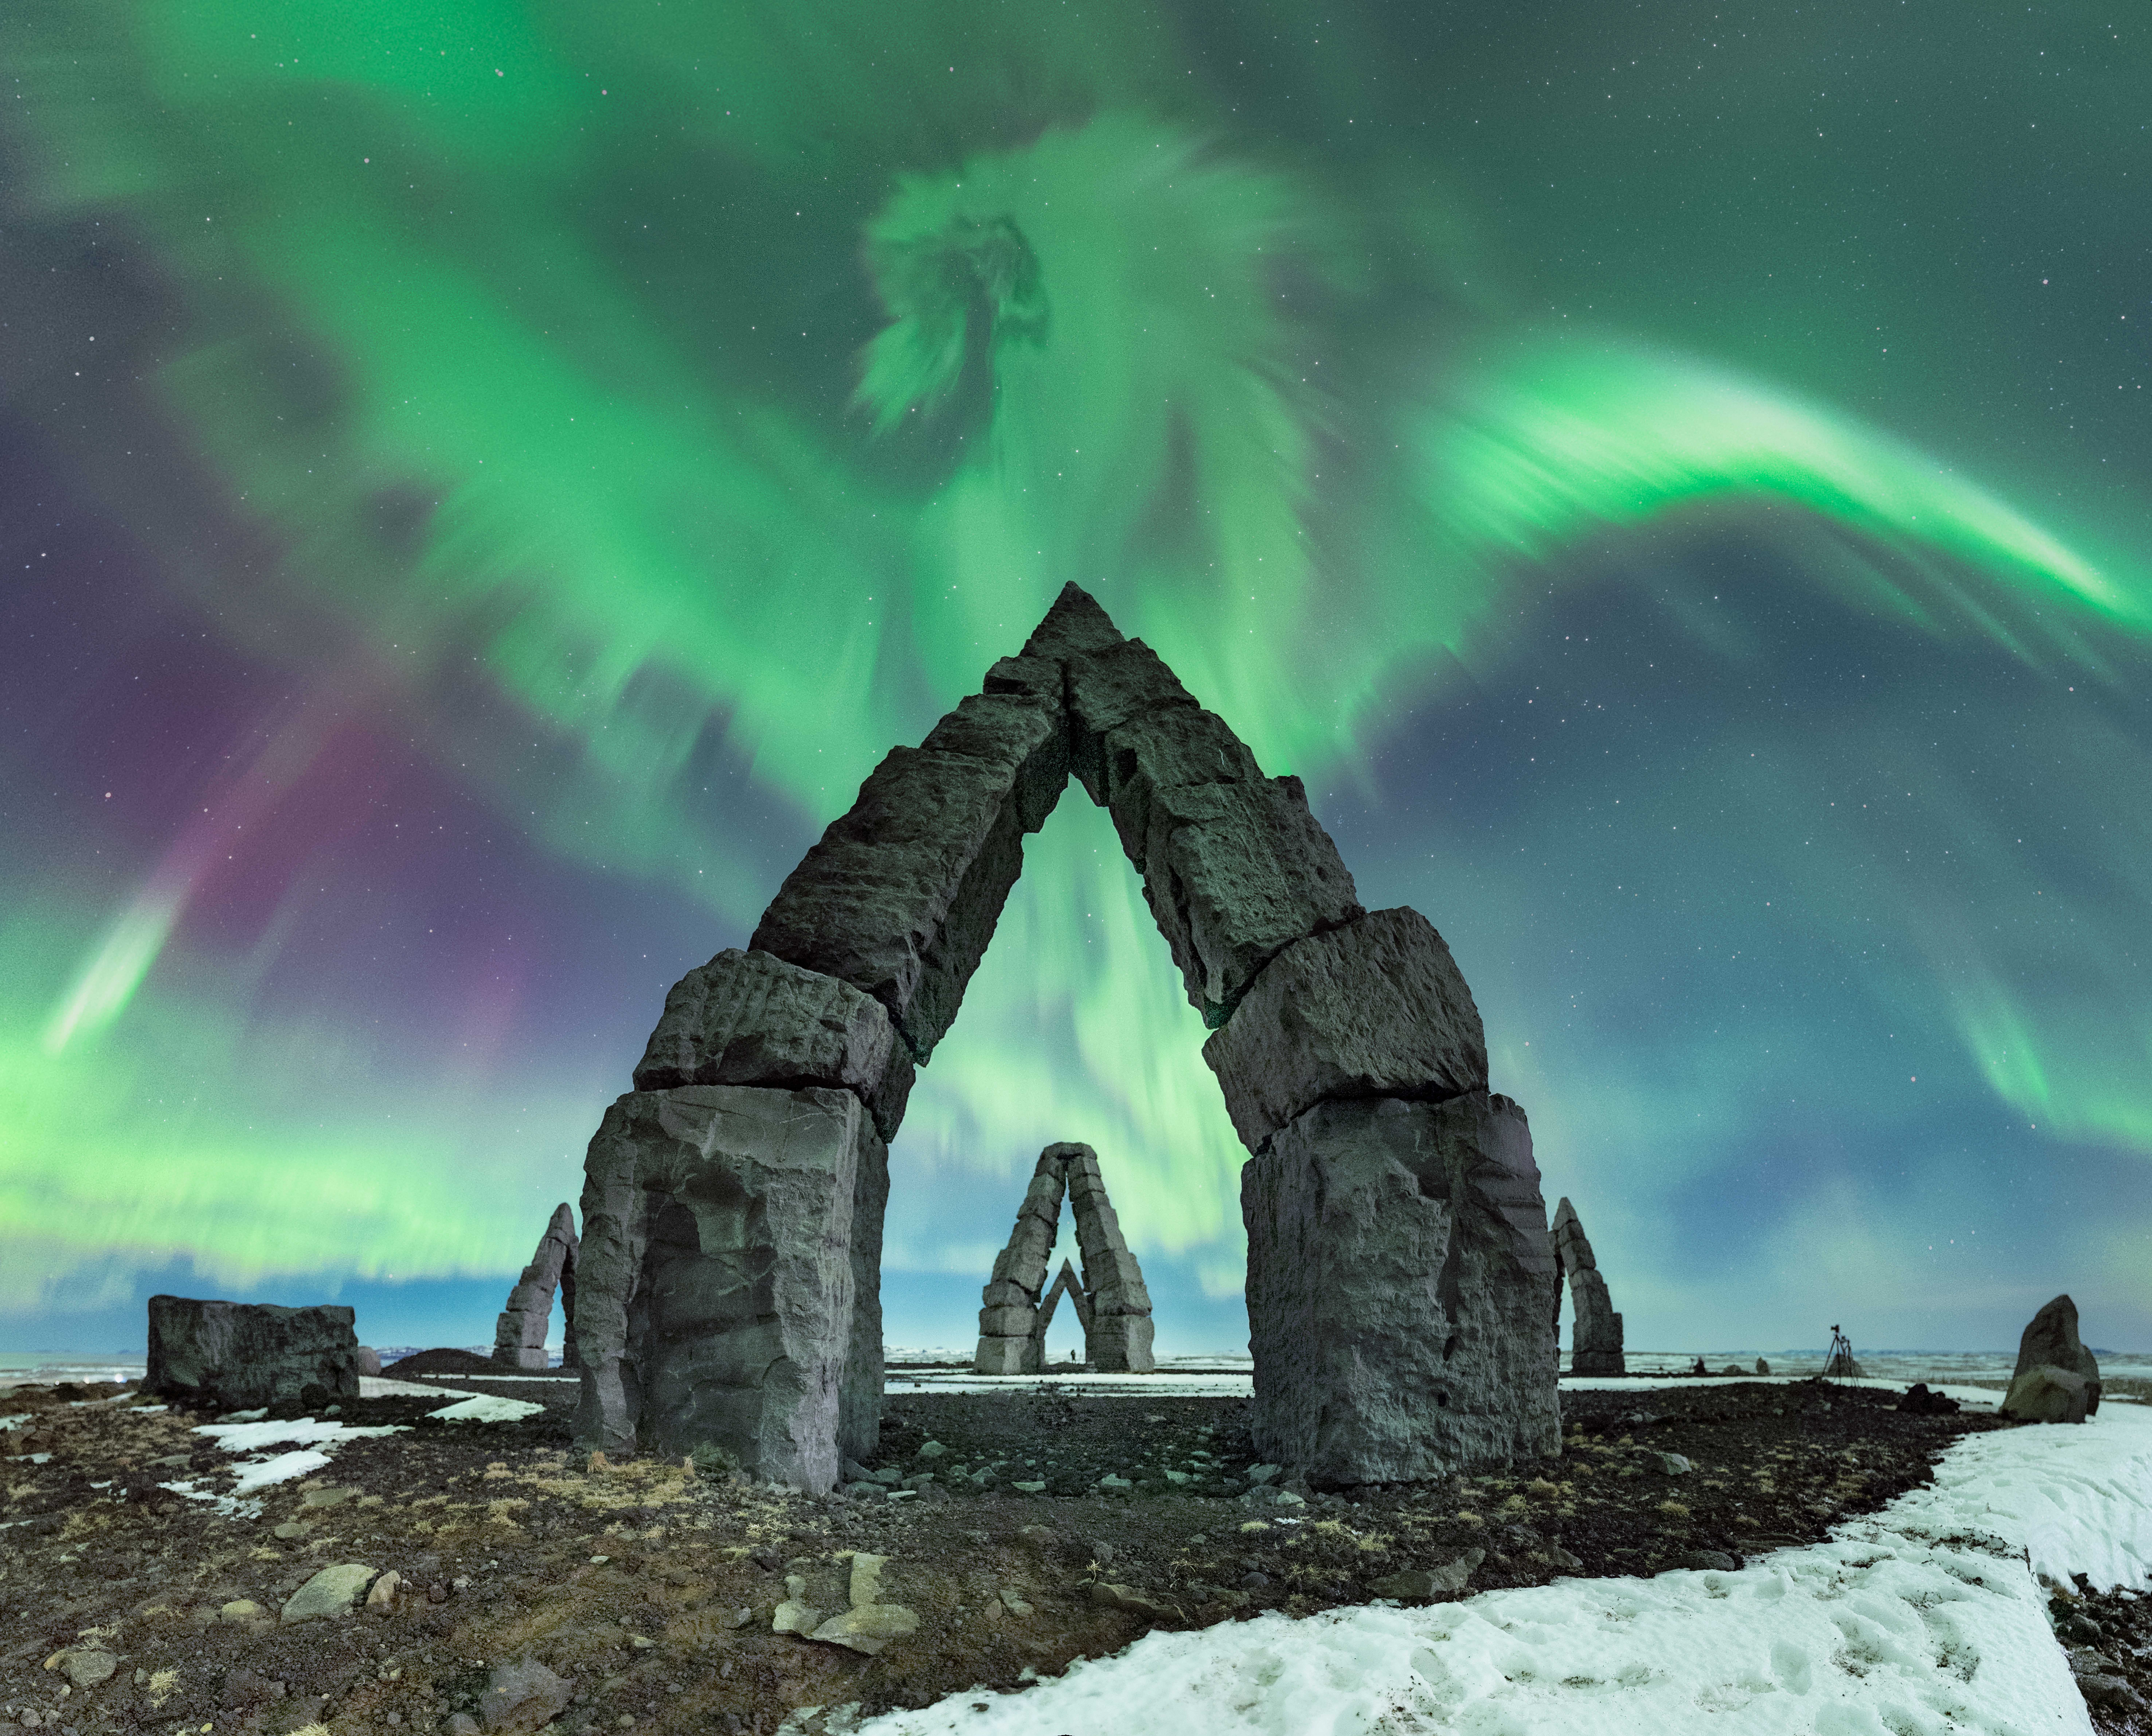 Stone arches are visible in the picture. Above in the sky a bright green aurora in the shape of a dragon with wing splaid